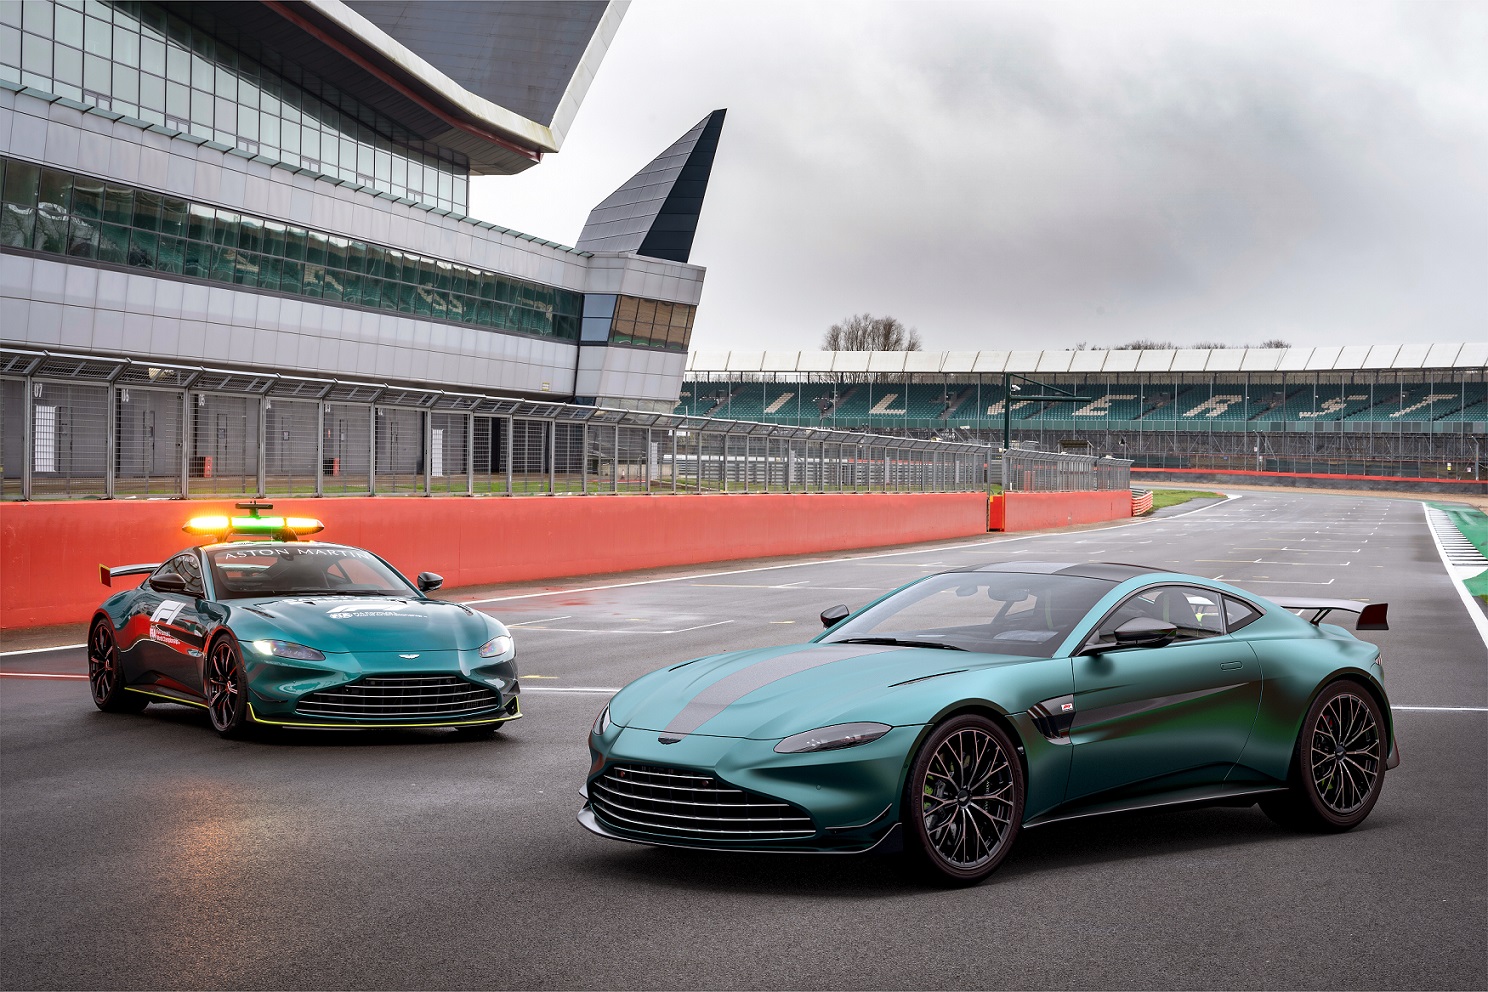 Aston Martin returns to Formula 1 with a special Vantage